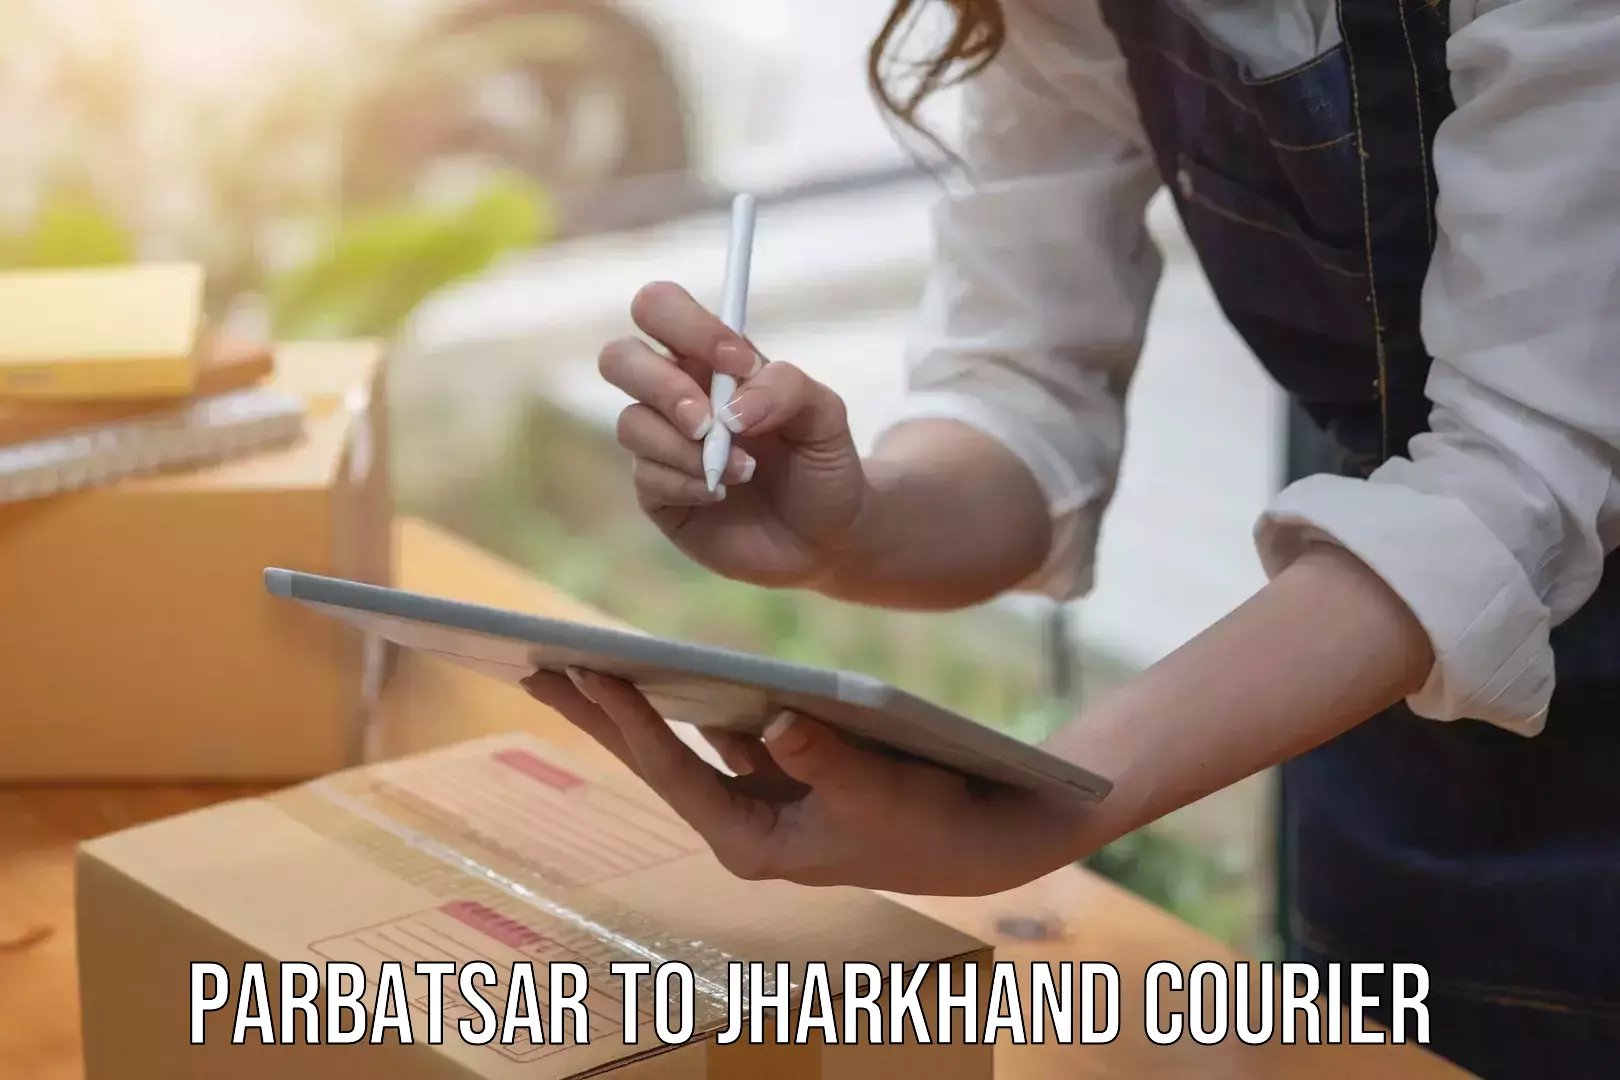 Fast delivery service Parbatsar to Padma Hazaribagh